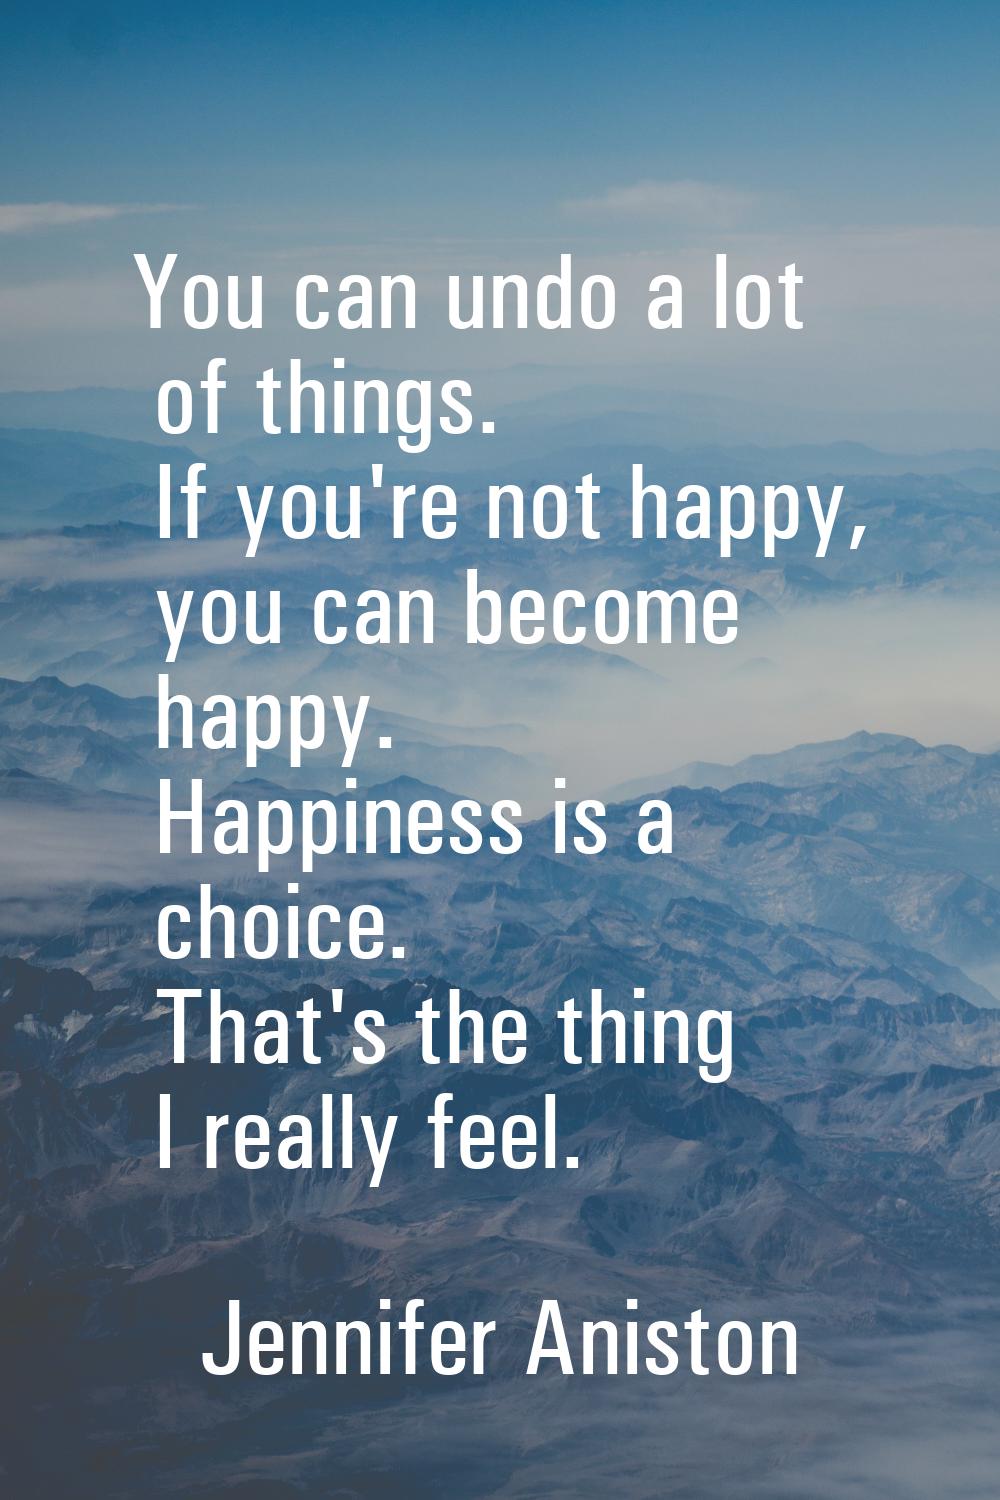 You can undo a lot of things. If you're not happy, you can become happy. Happiness is a choice. Tha